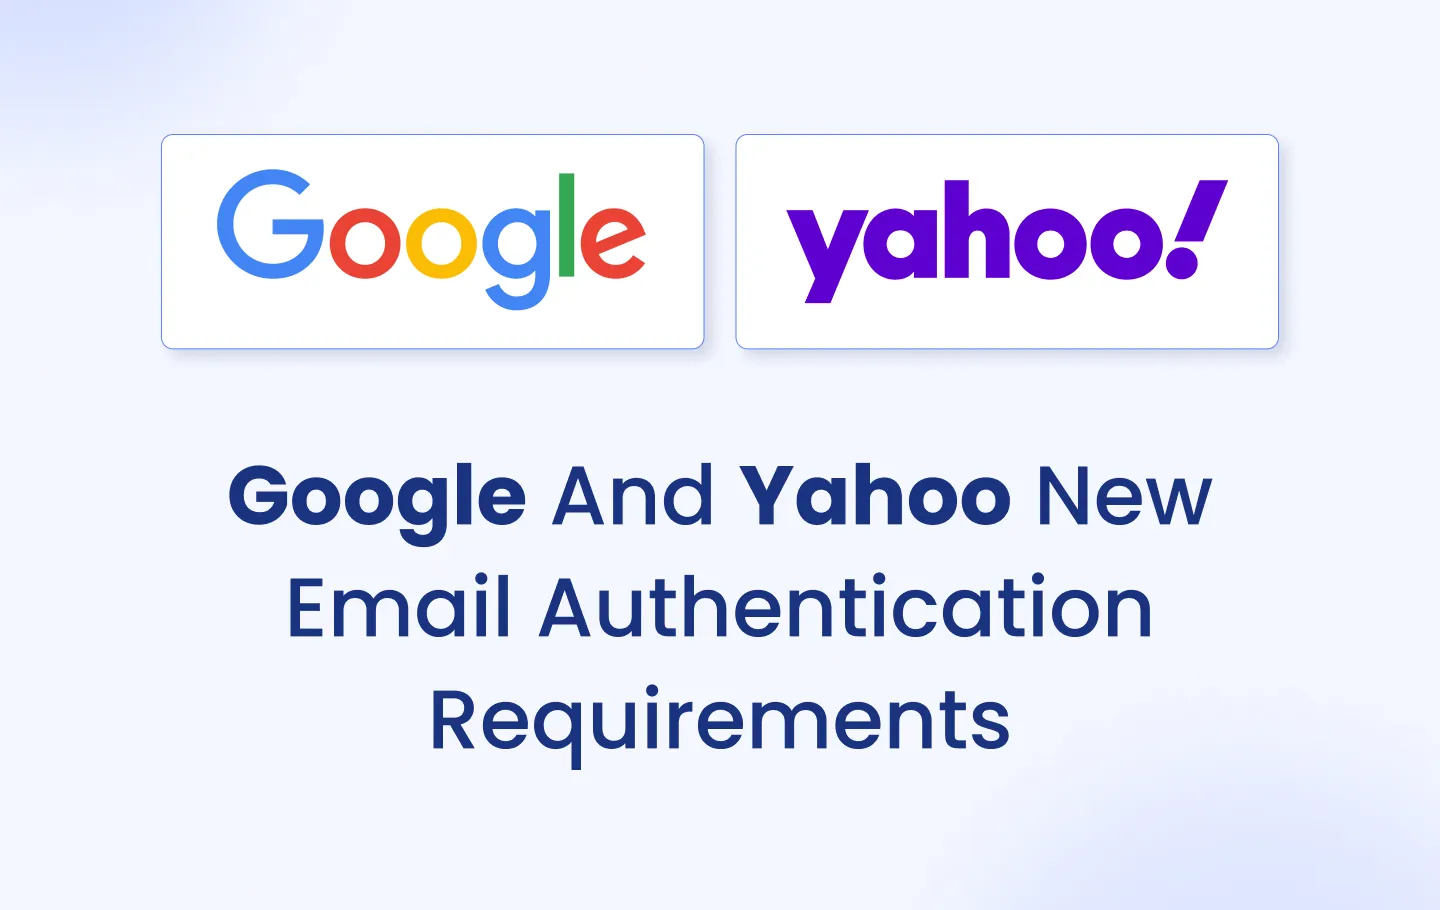 Google and Yahoo email authentication requirements